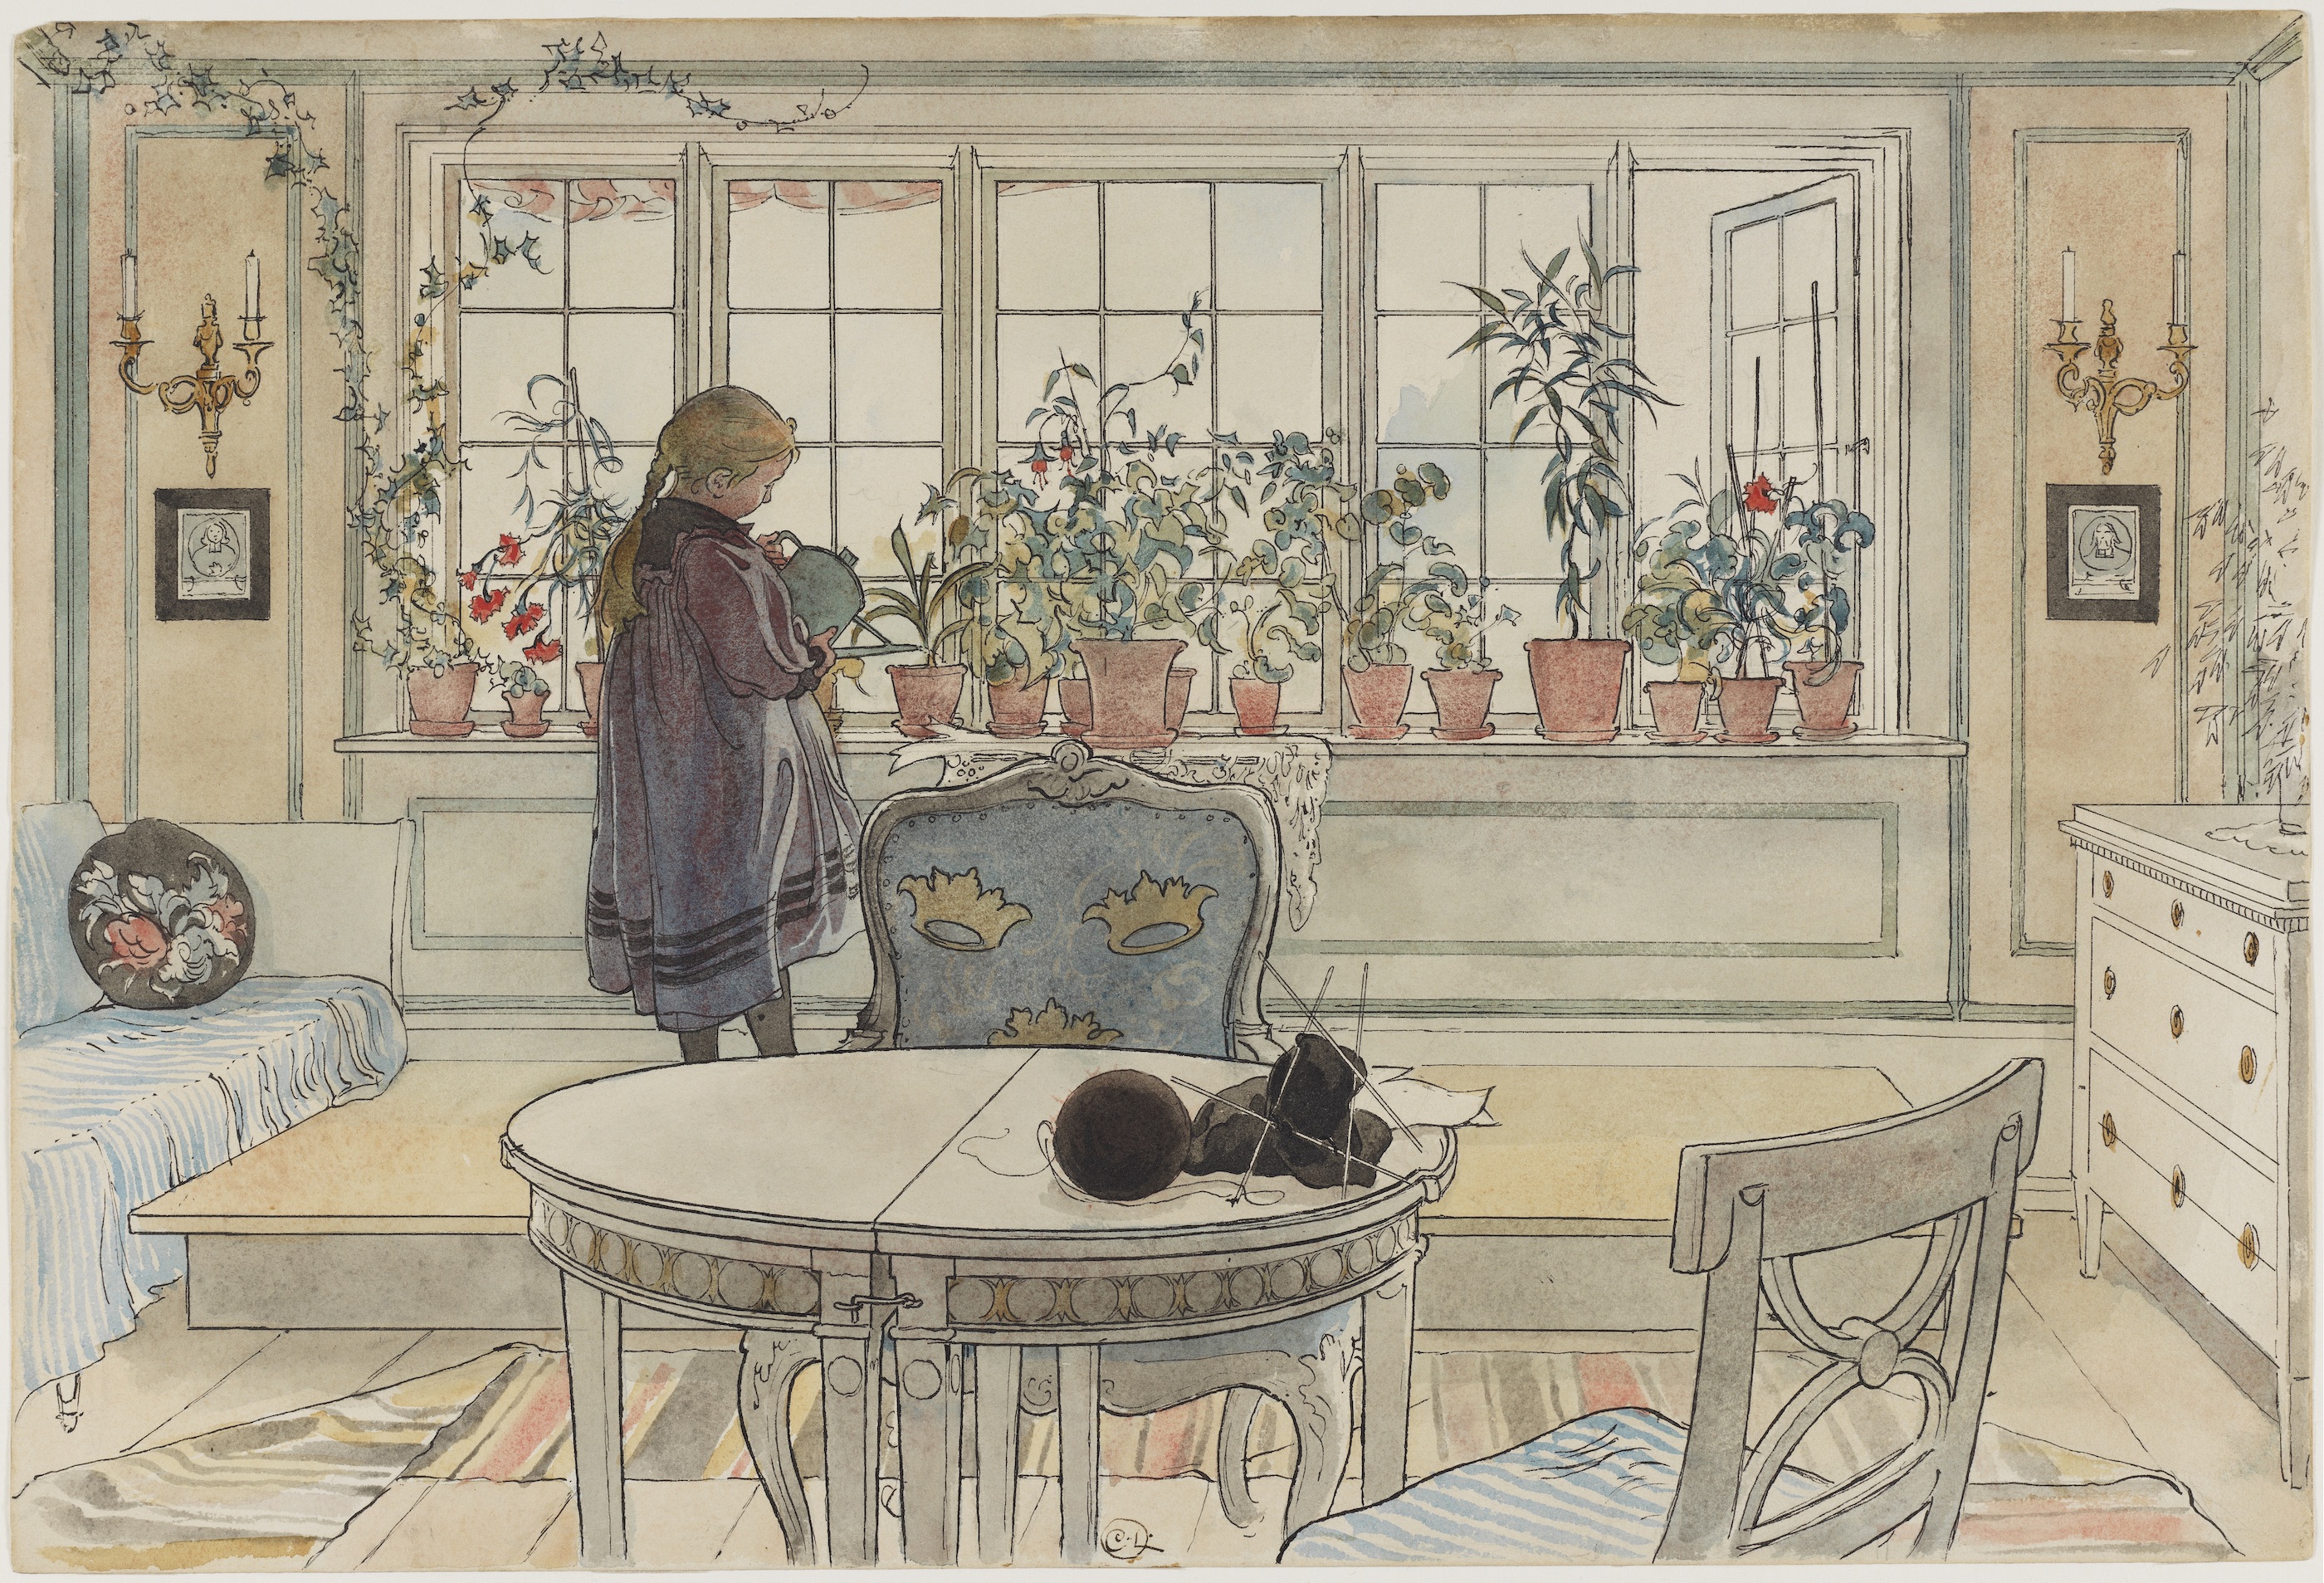 Flowers on the Windowsill. From "A Home" by Carl Larsson - 1900 - 32 x 43 cm Nationalmuseum